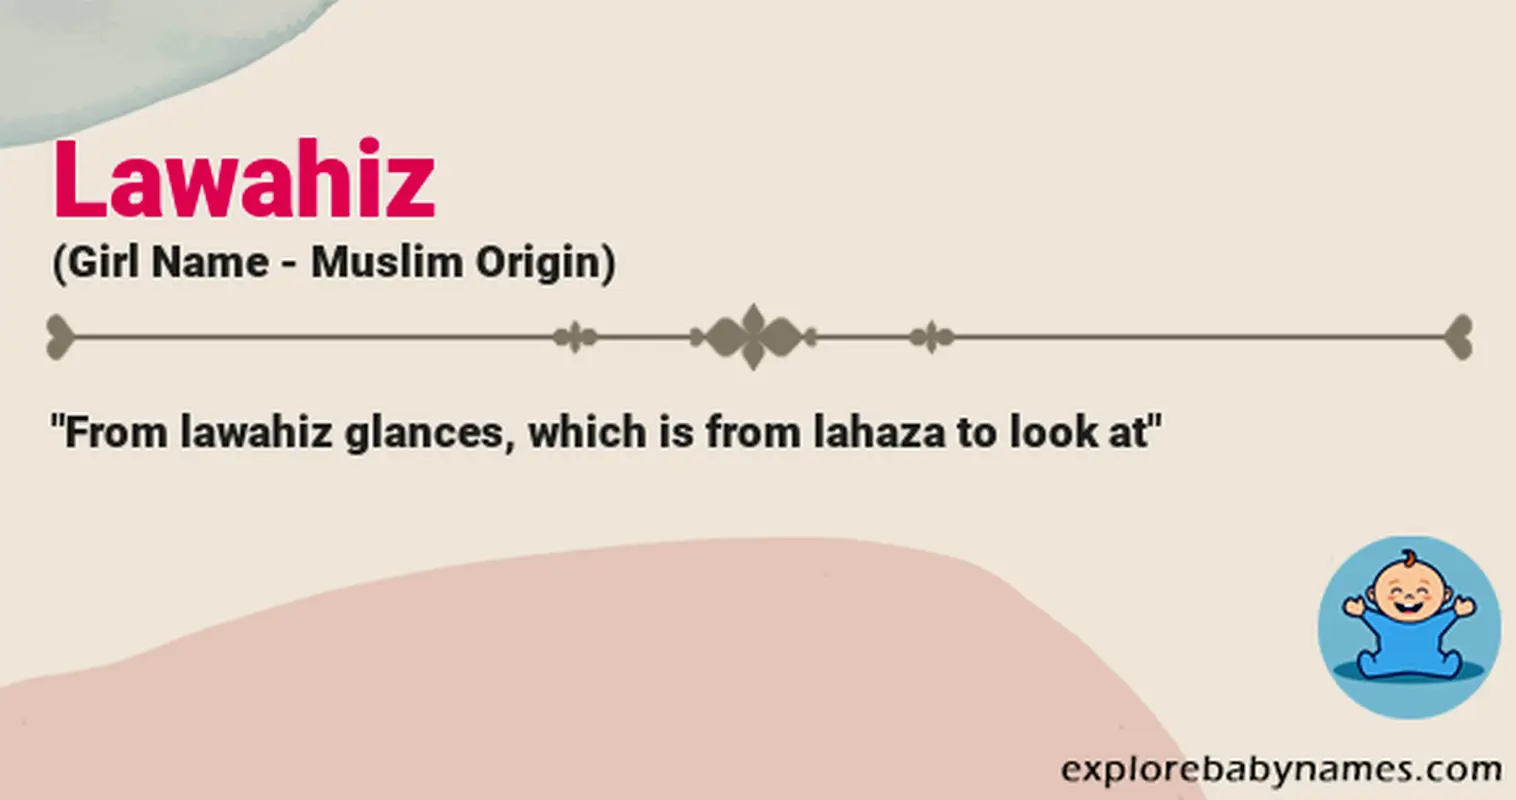 Meaning of Lawahiz